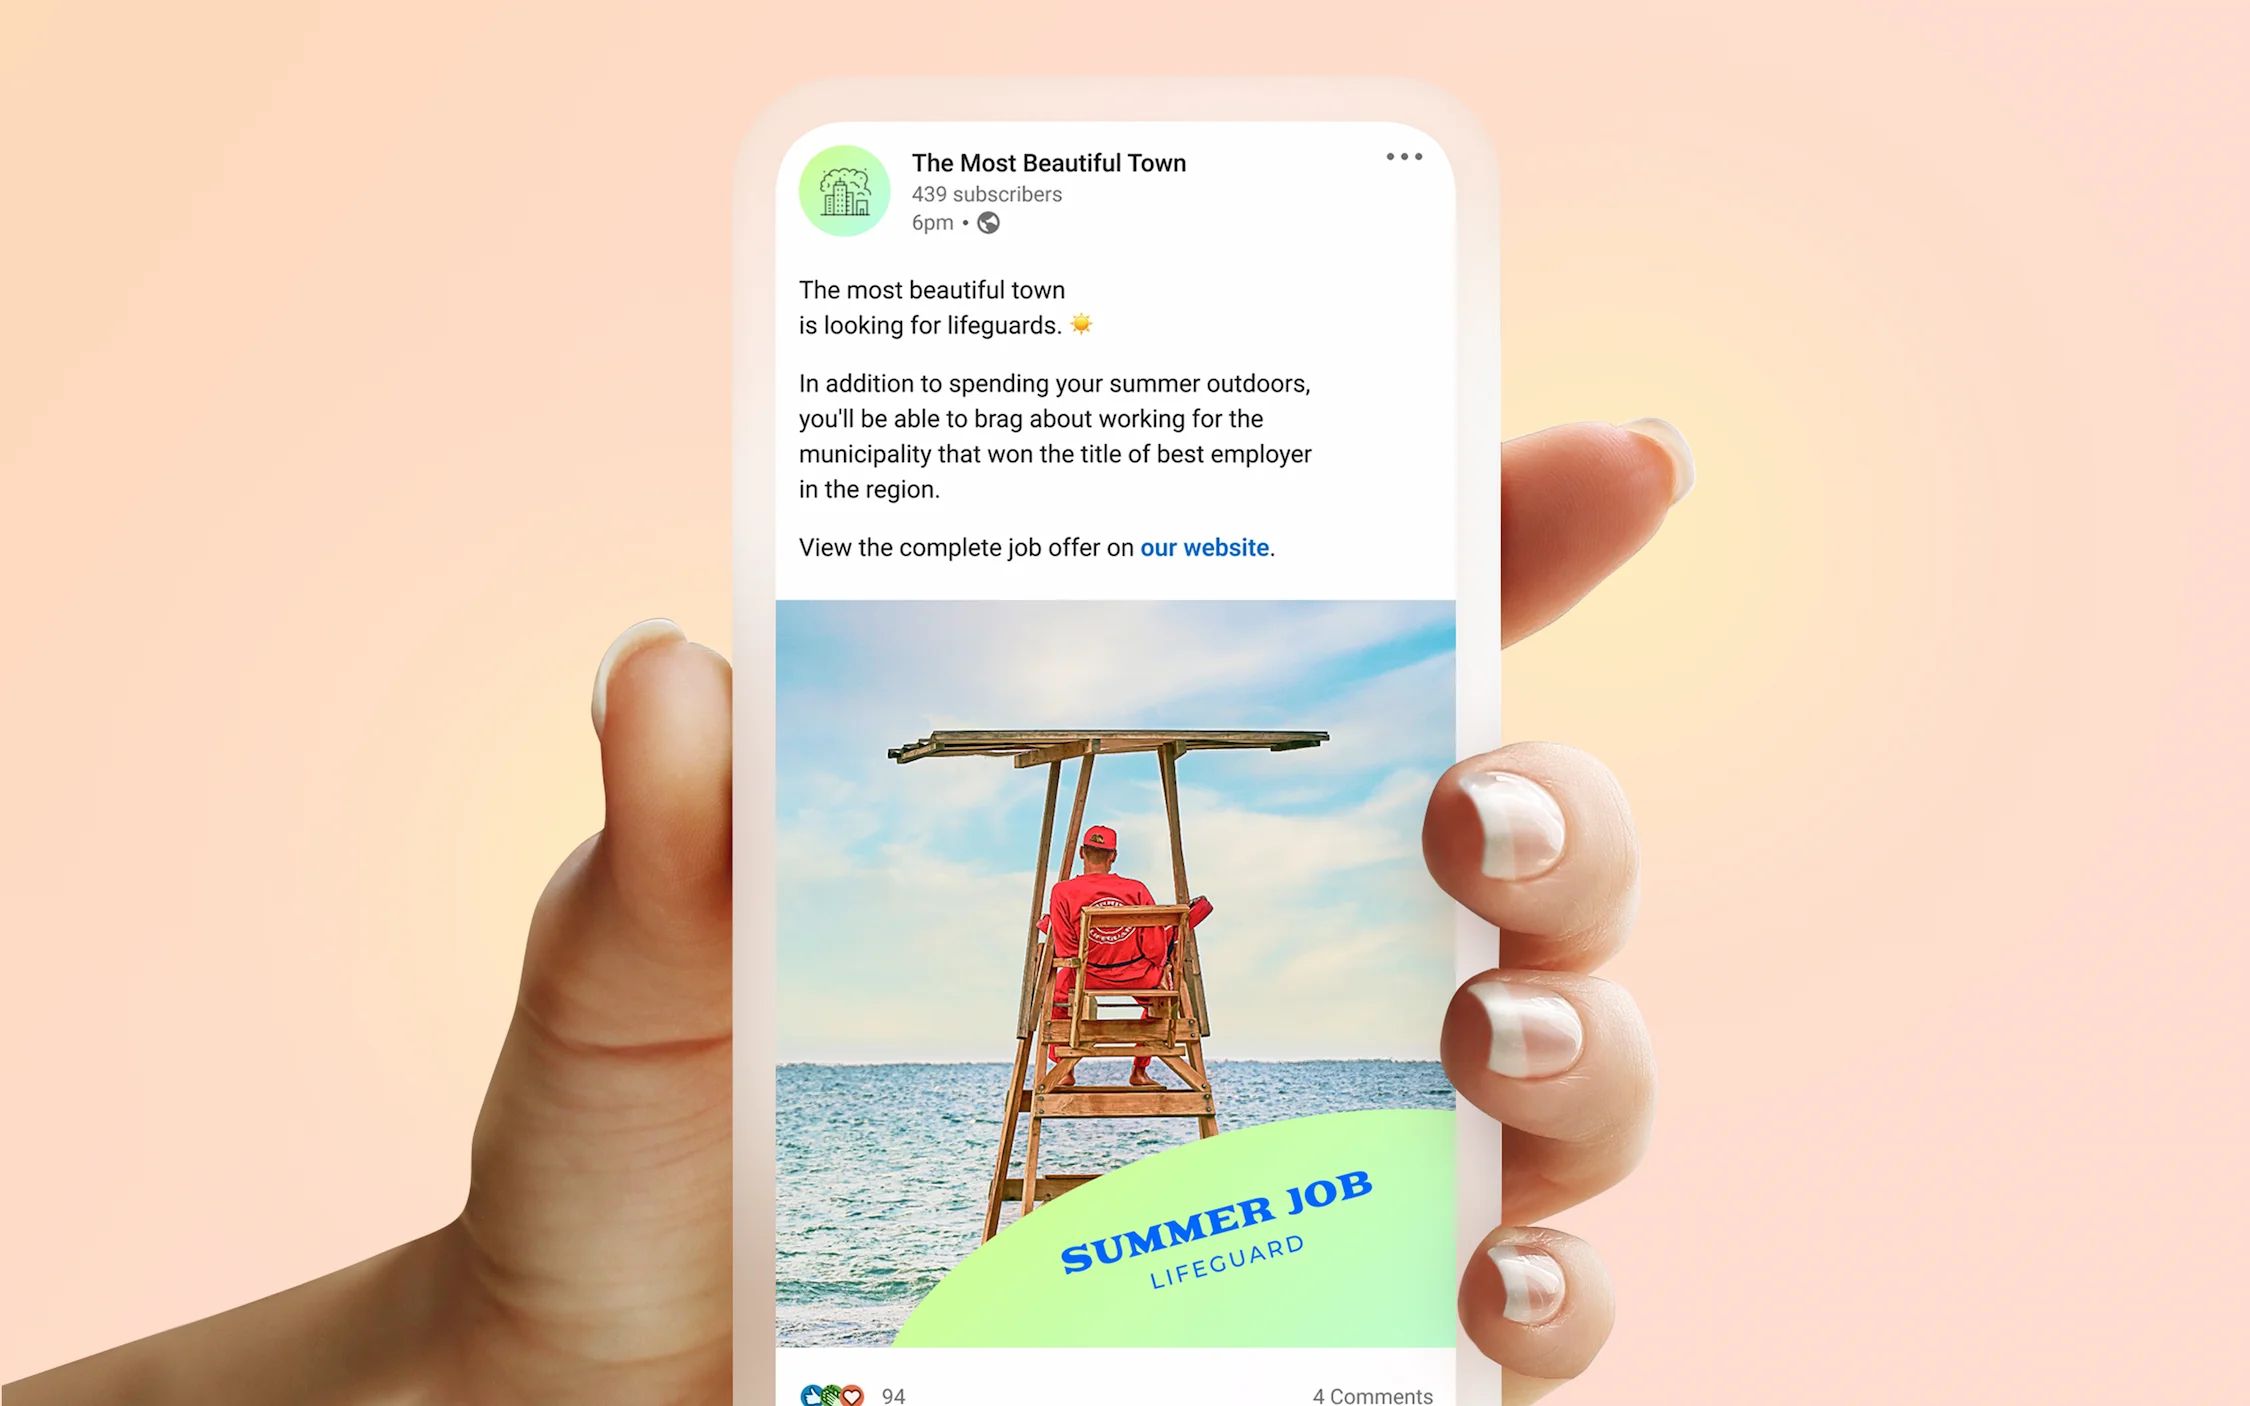 Hand holding a mobile device, on the screen we see a LinkedIn publication with a beach lifeguard installed on his lifeguard chair